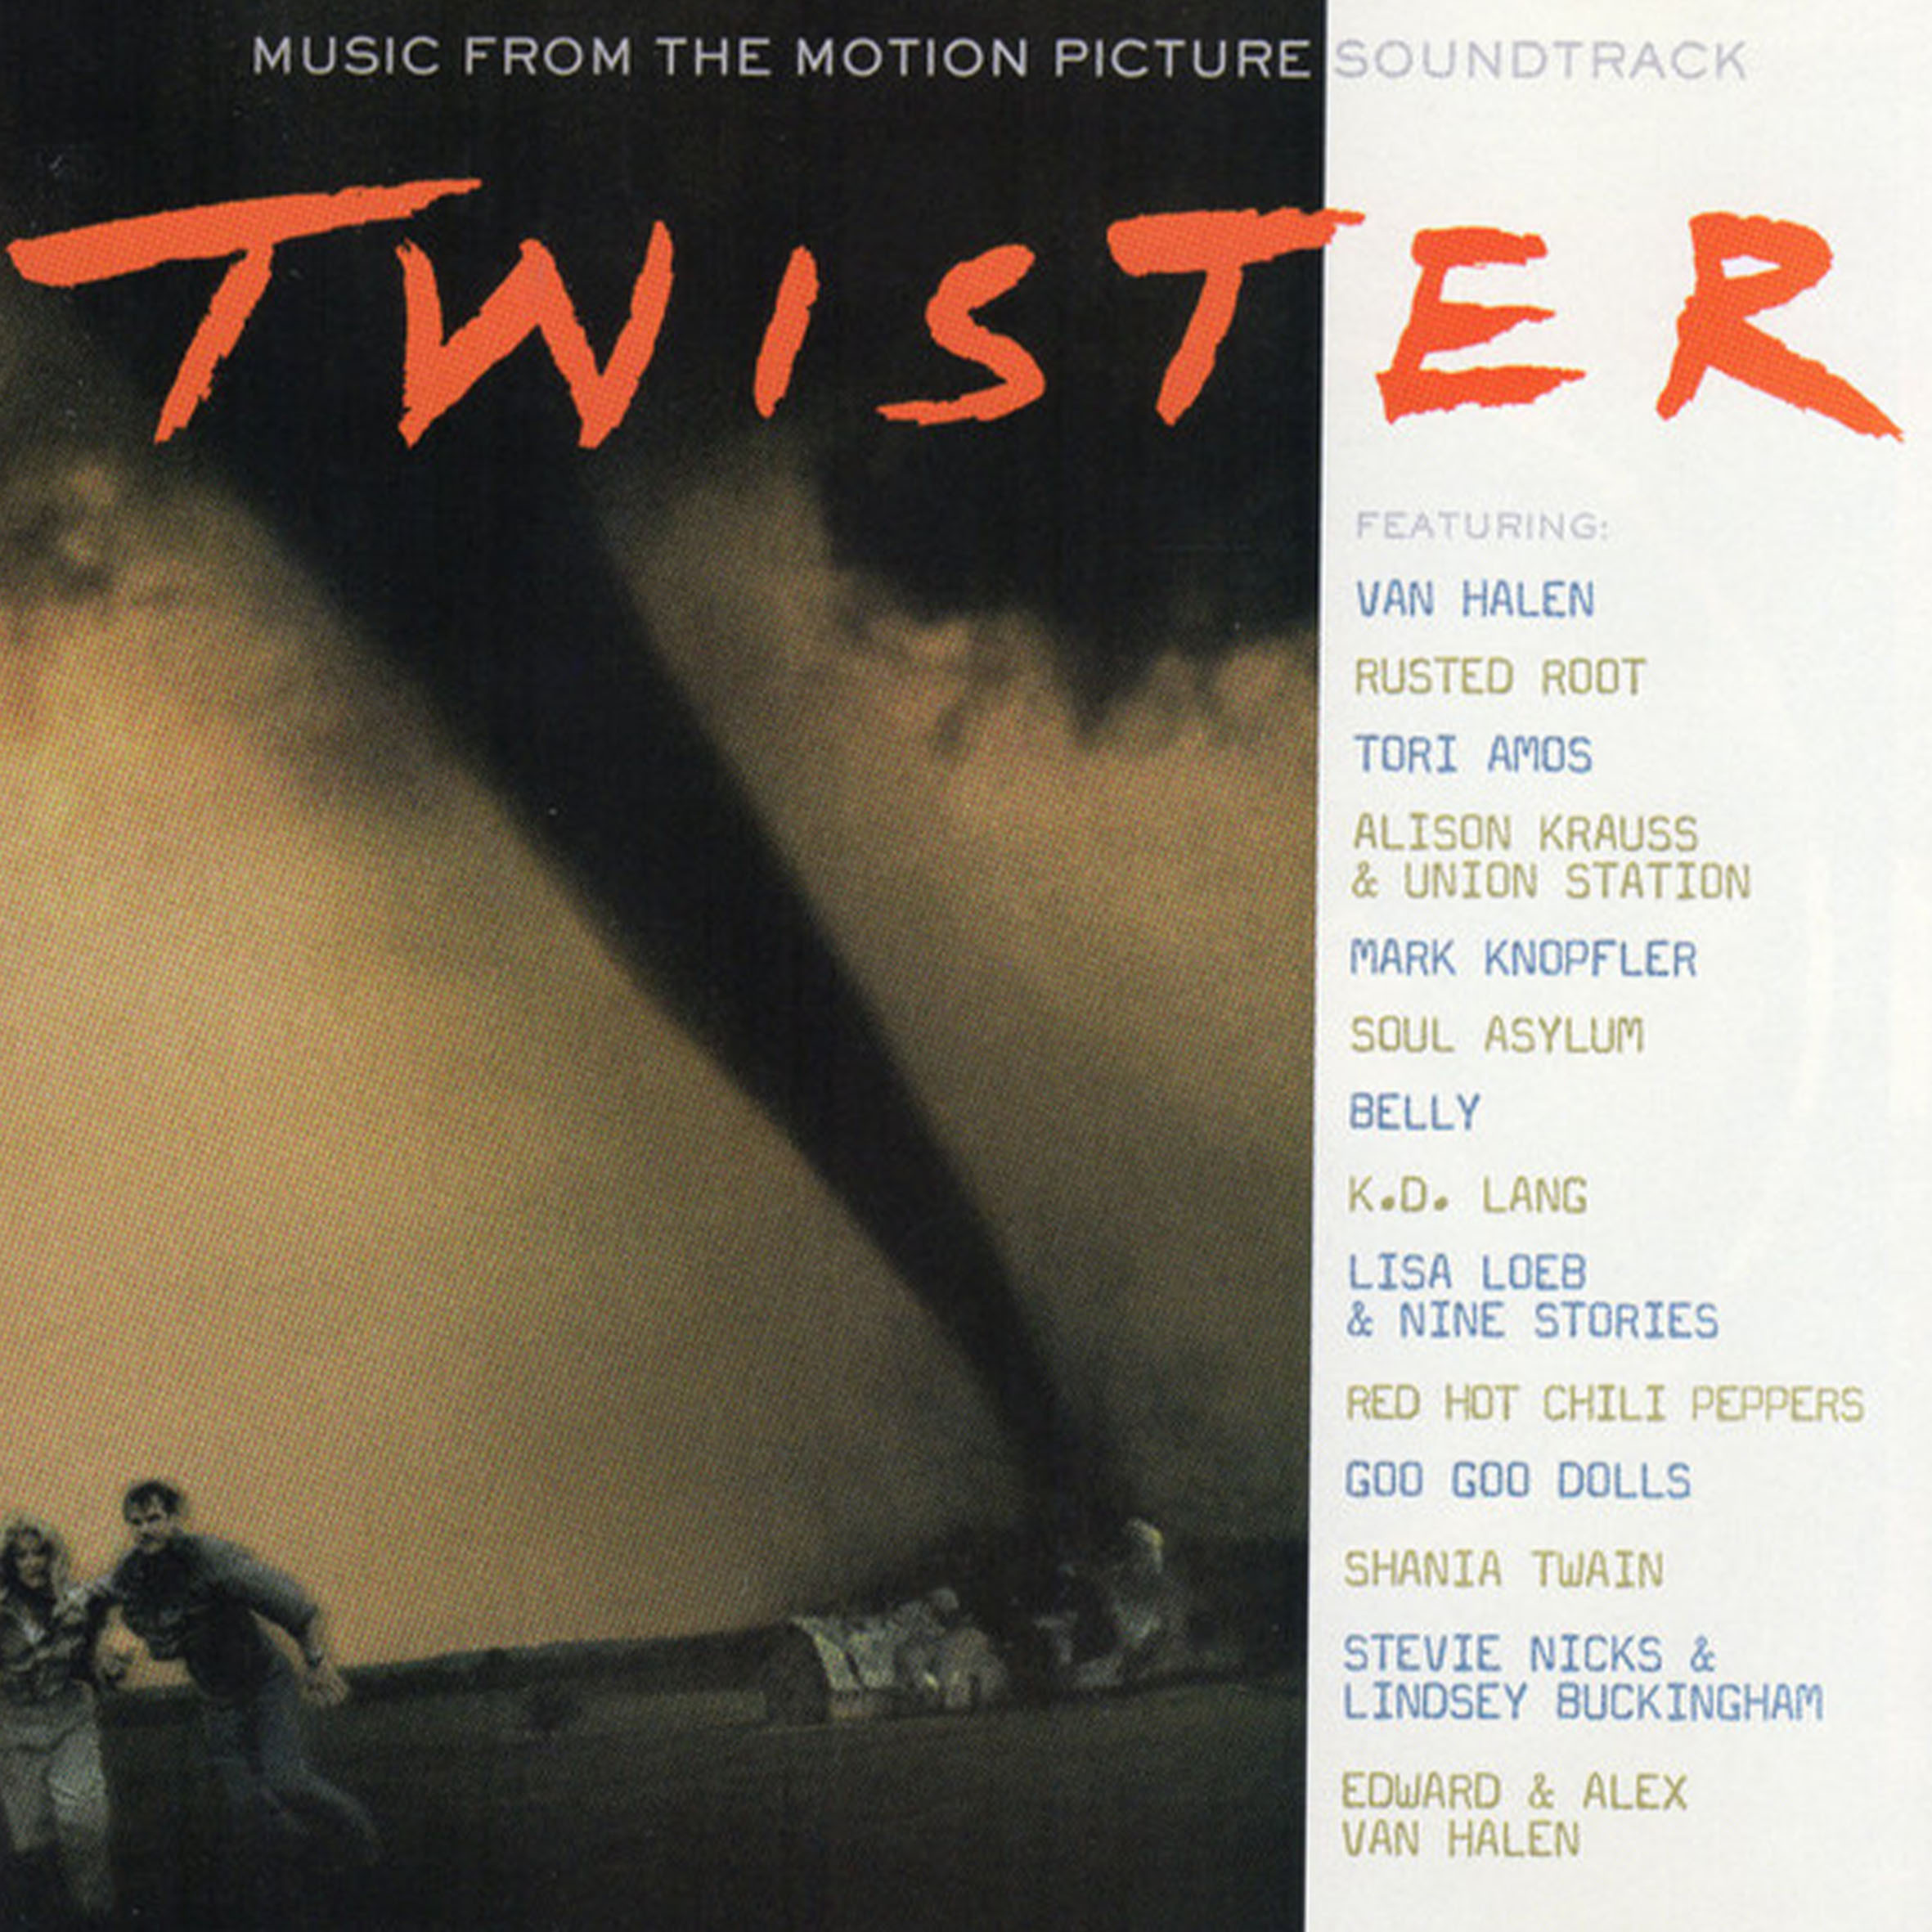 CD - Twister - Music From The Motion Picture Soundtrack